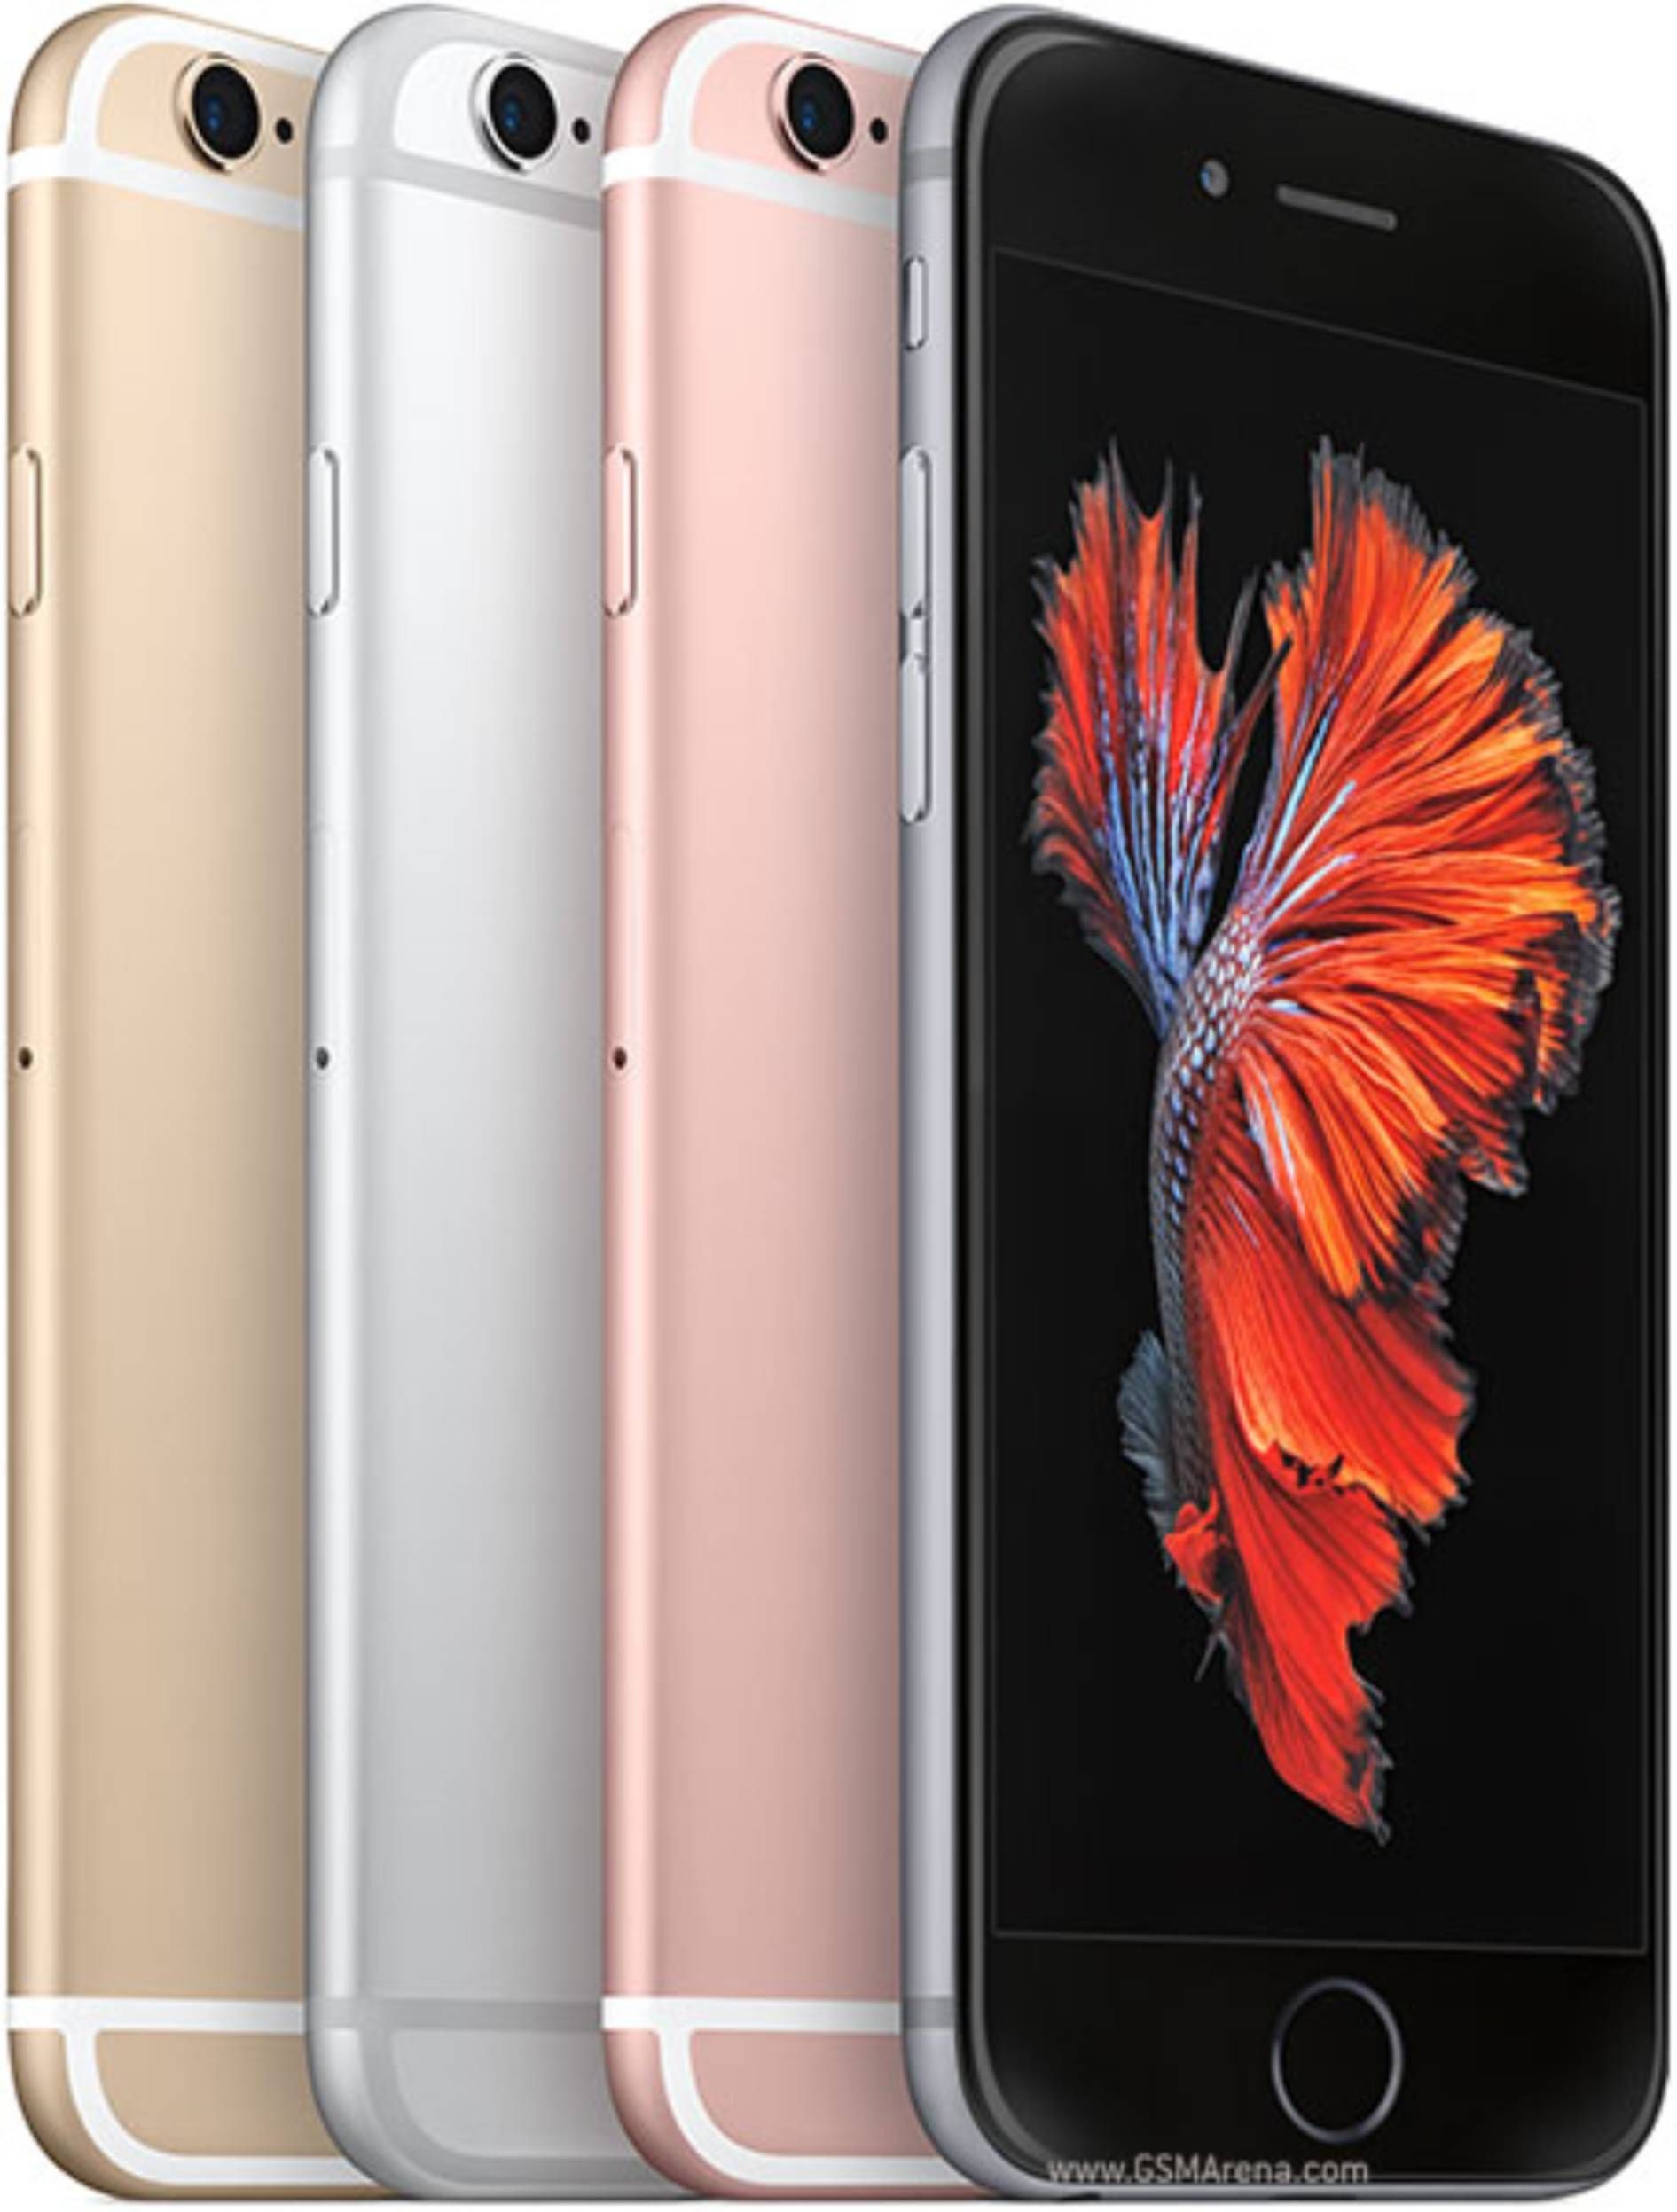 What is Apple iPhone 6s Plus Screen Replacement Cost in Kenya?